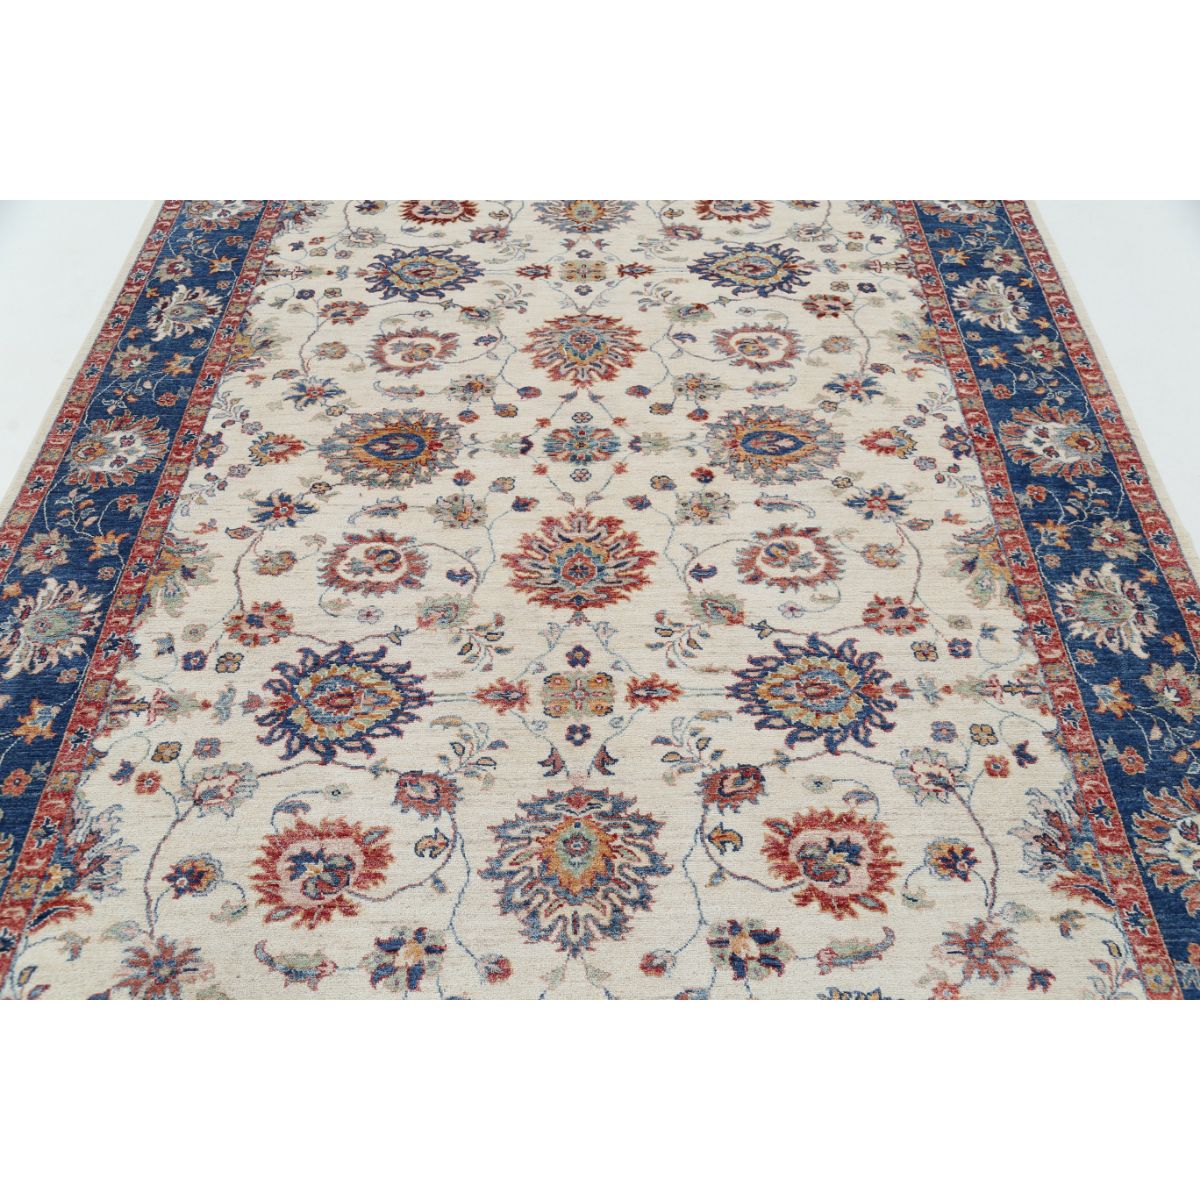 Ziegler 6'7" X 8'11" Wool Hand-Knotted Rug